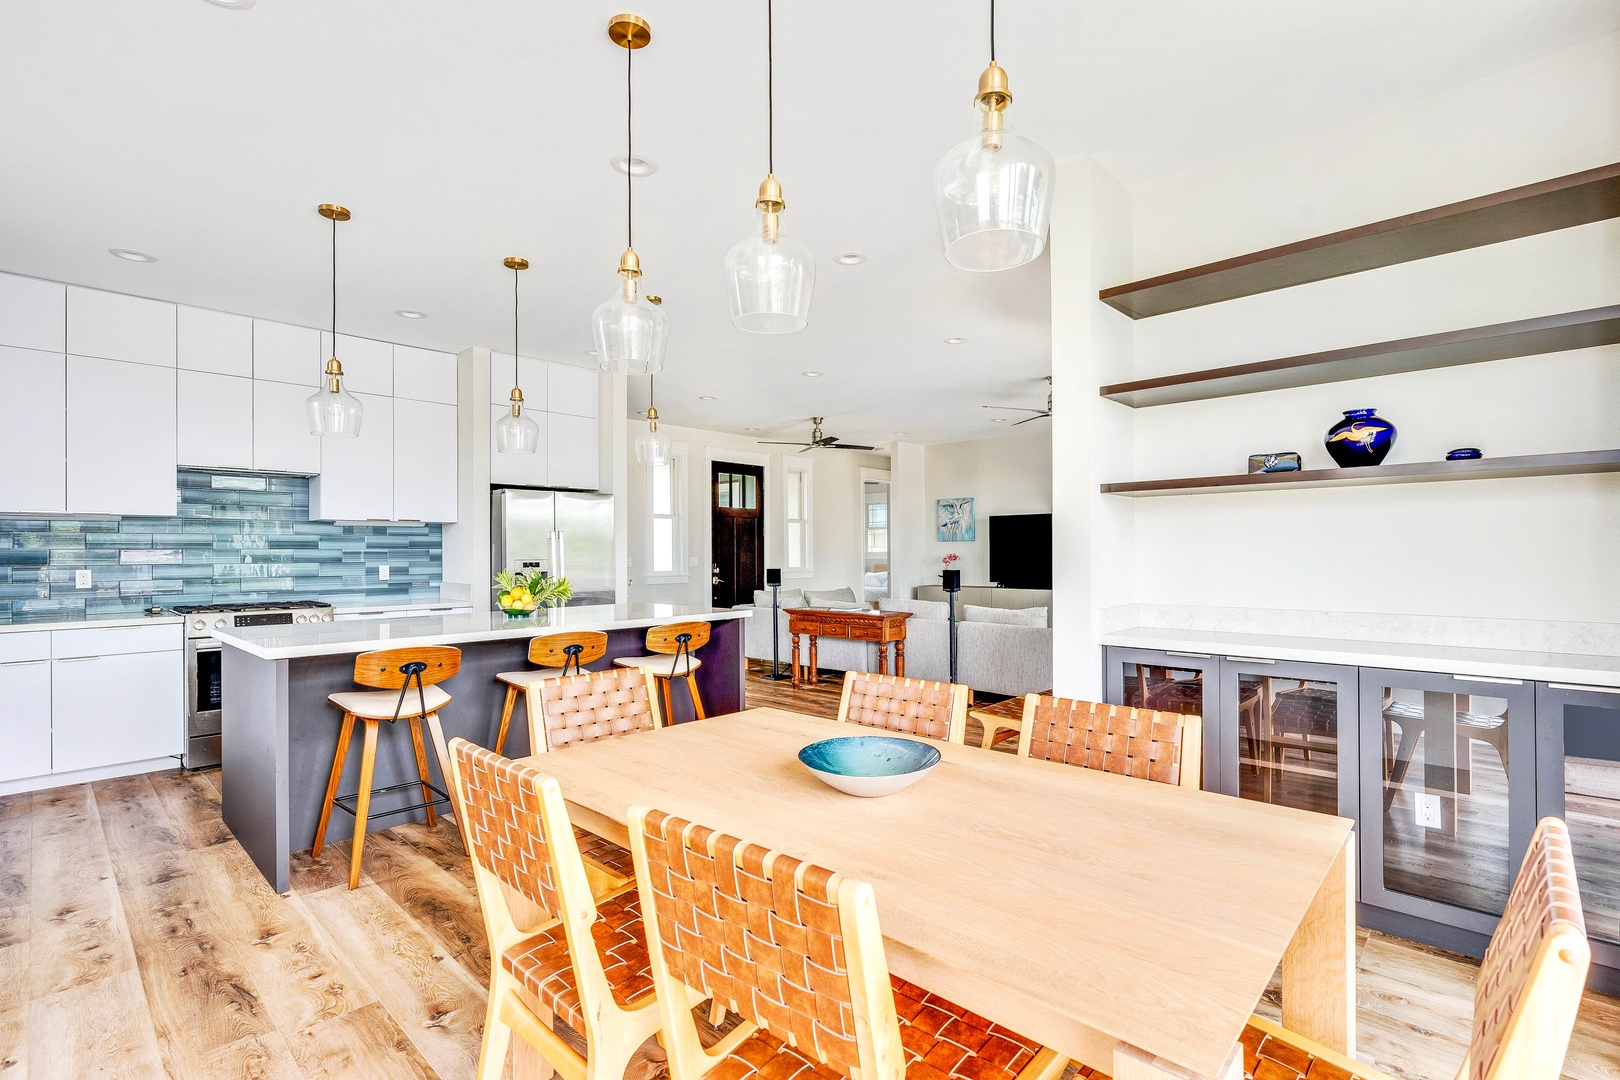 Koloa Vacation Rentals, JC Surf House - Rustic dining area with seating for six.